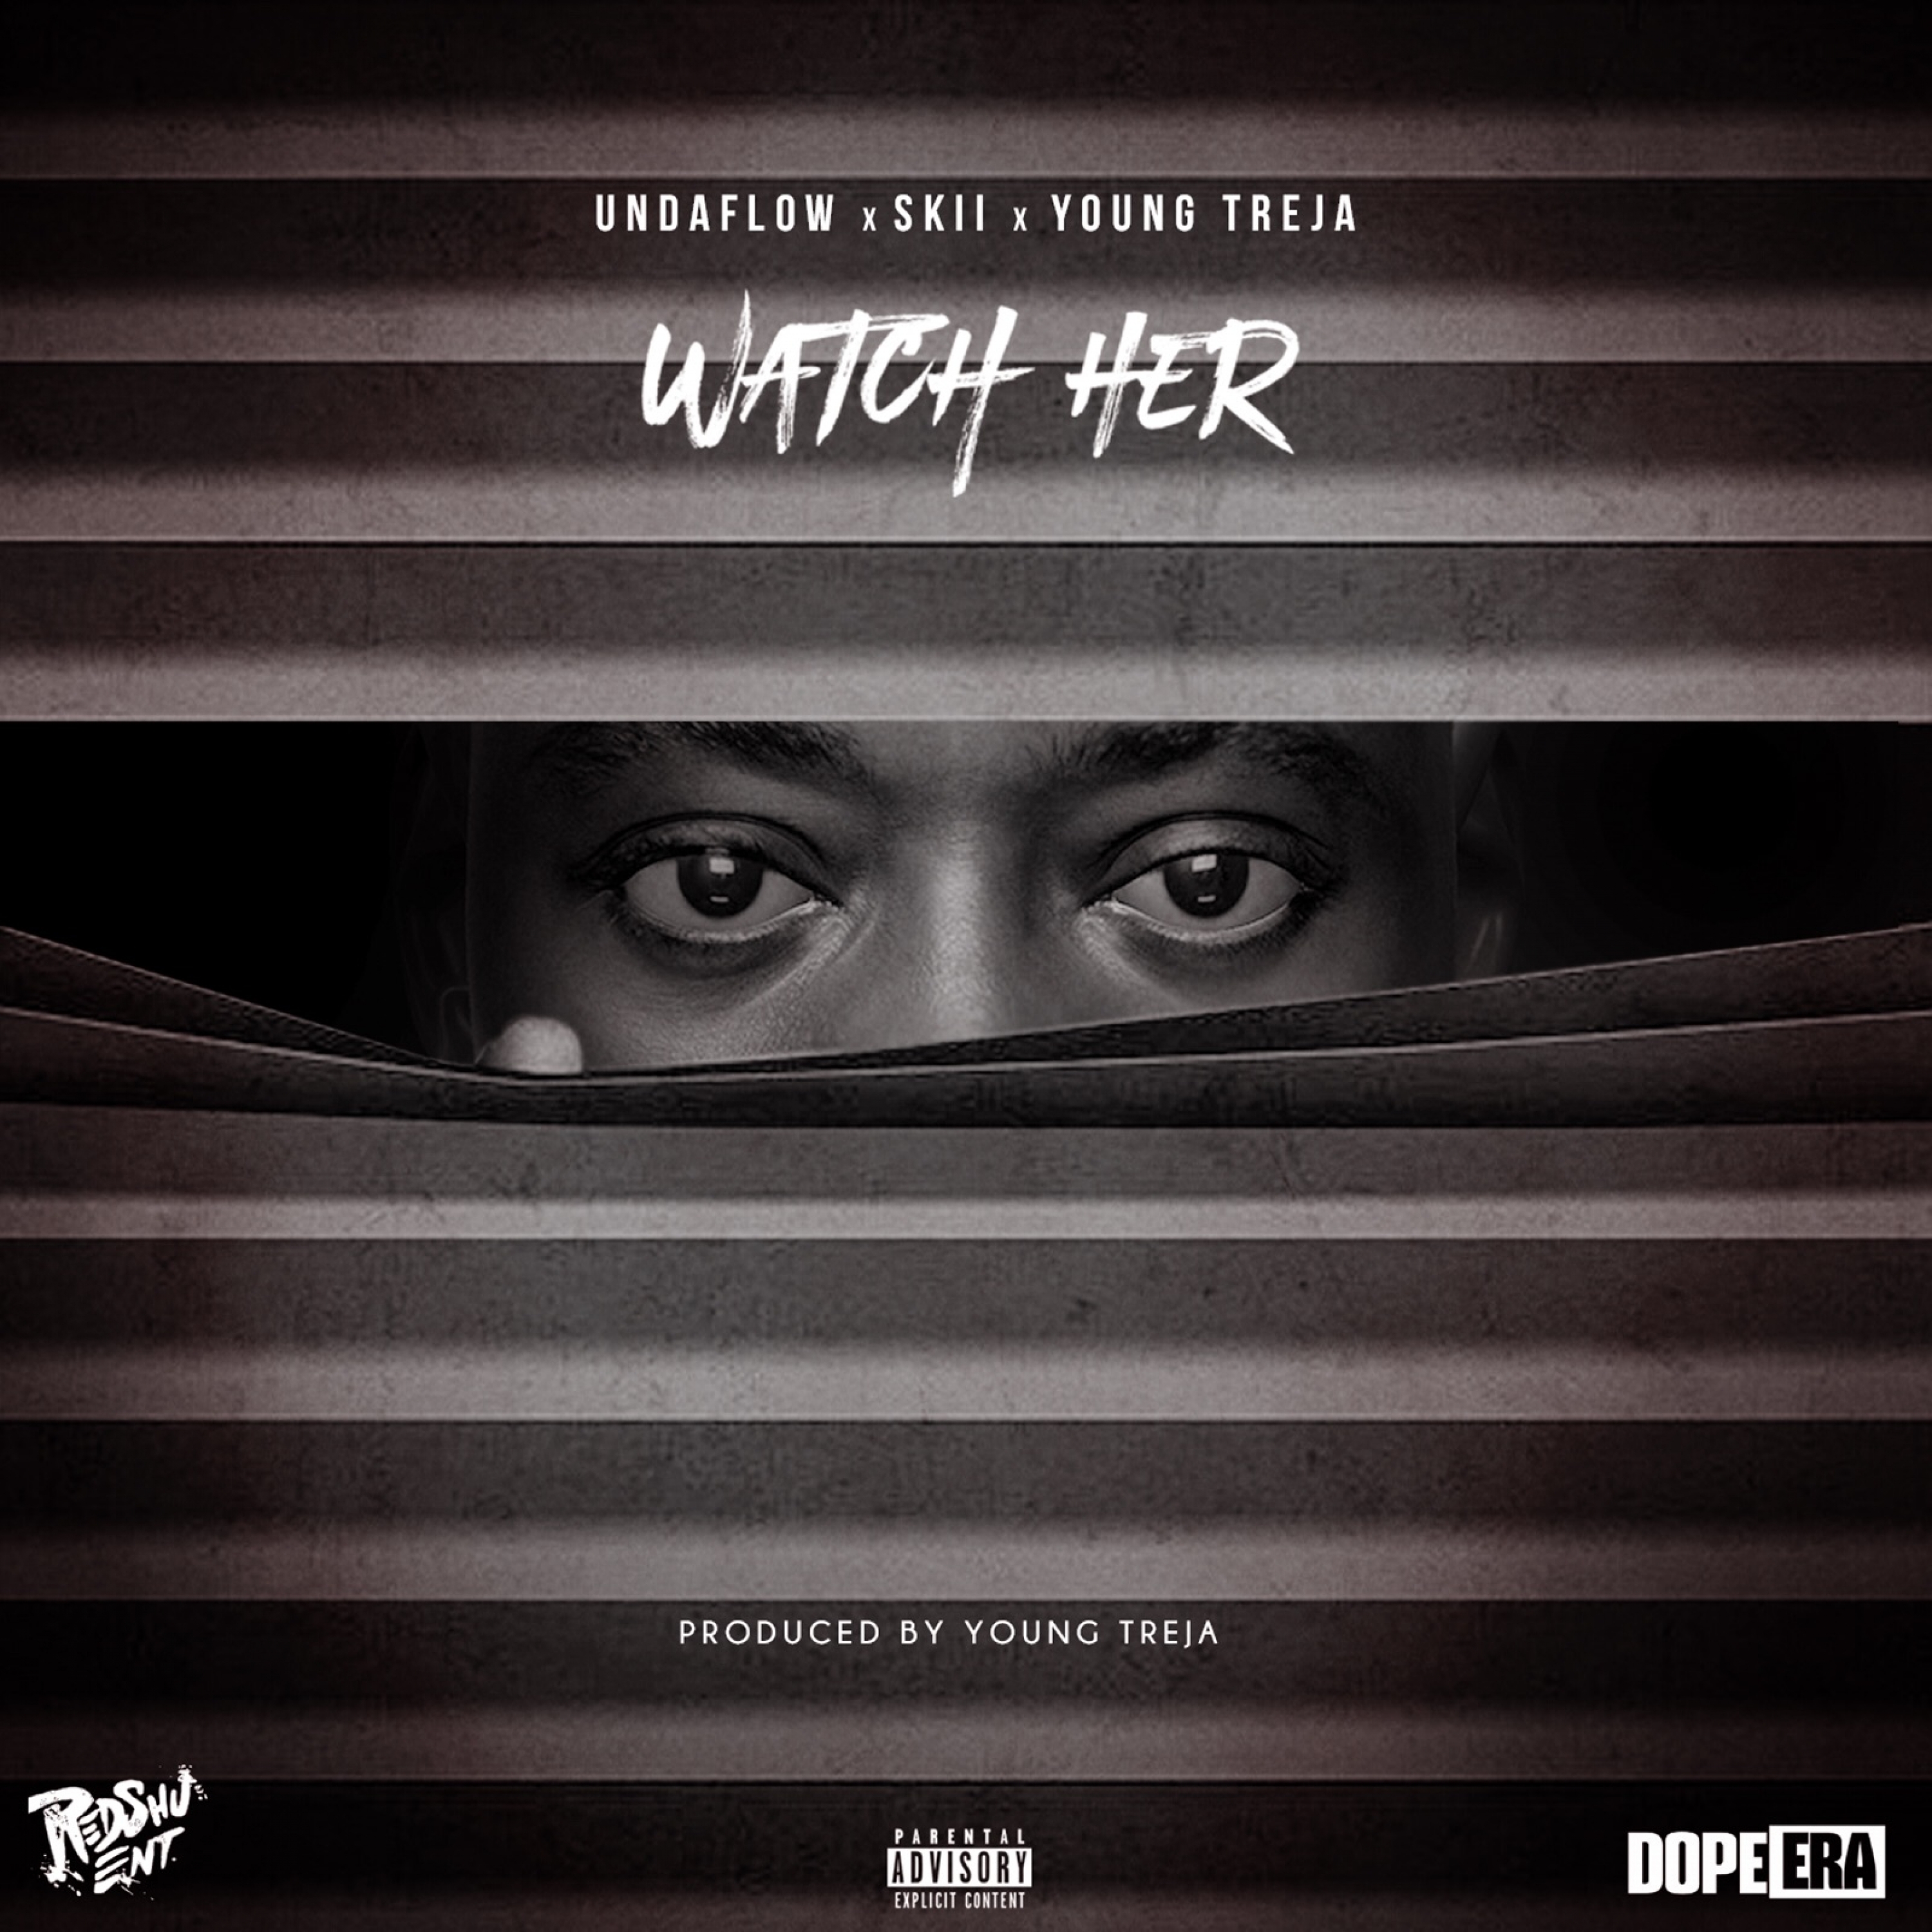 Watch Her (feat. Skii & Young Treja)